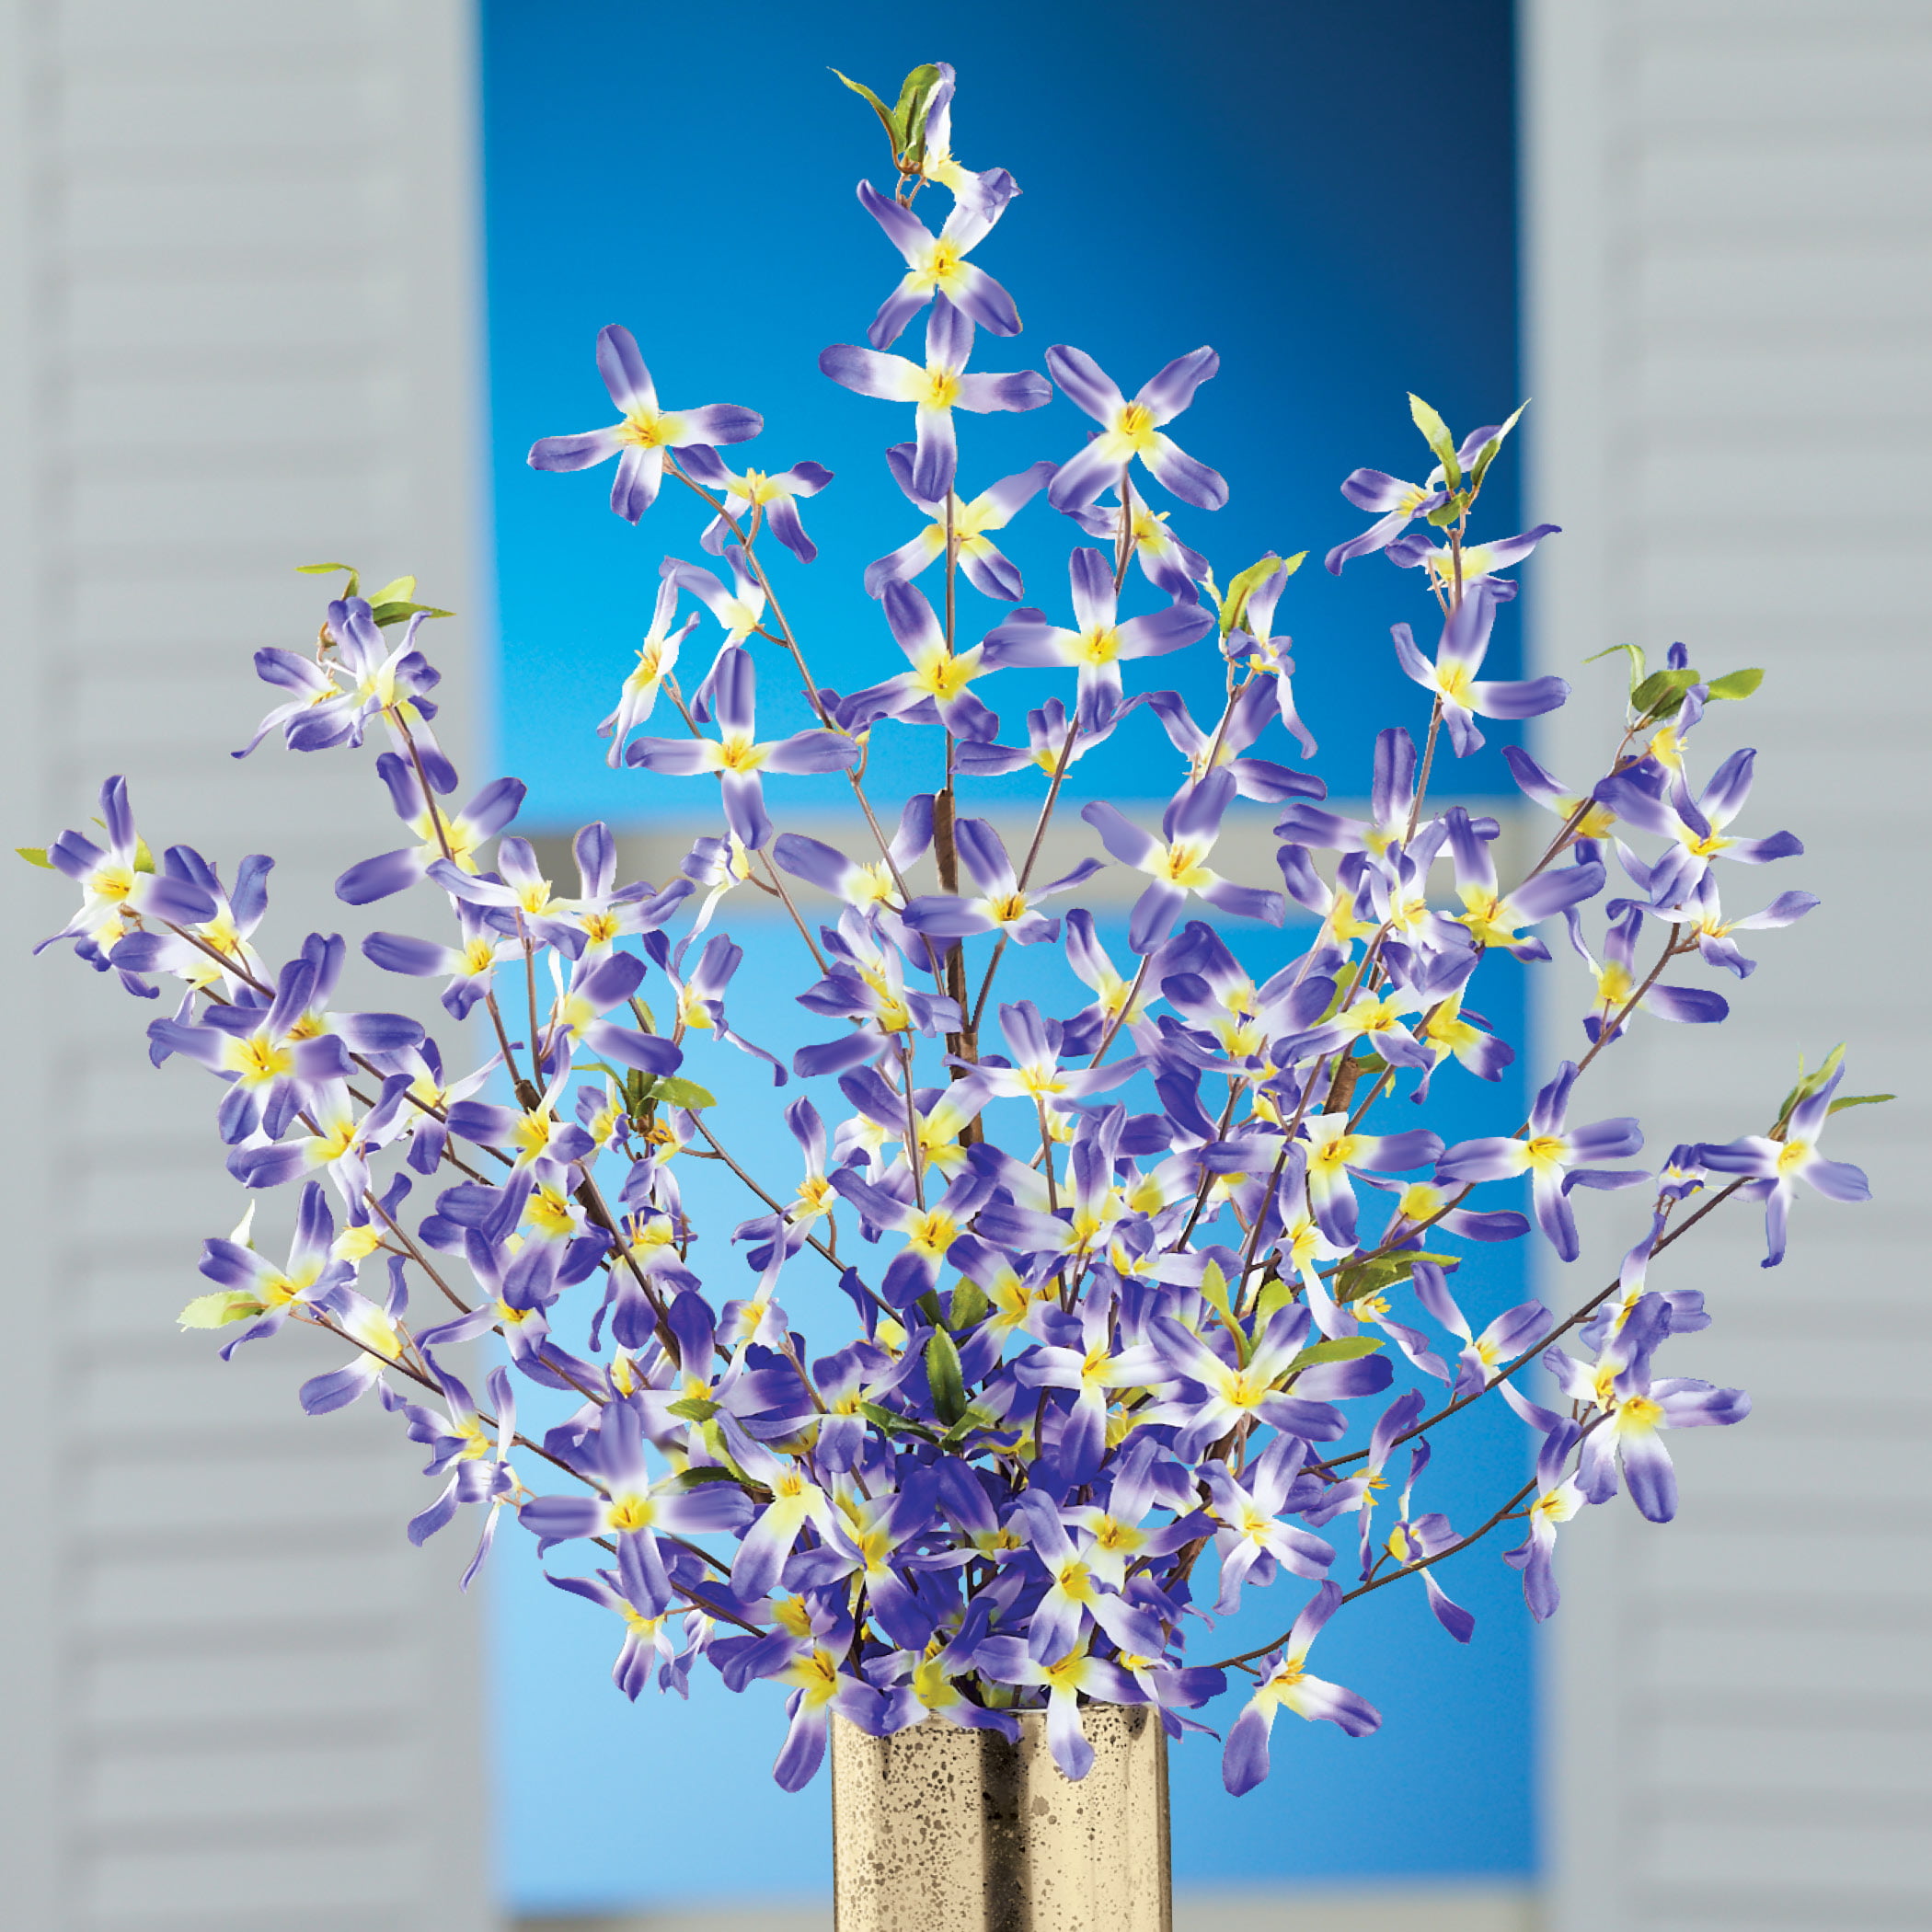 Springtime Artificial Forsythia Bushes For Indoor or Outdoor Use Garden or Any Room in Home Bunch Together or Separate Plants Set of 3 Realistic Touch Faux Shrubs